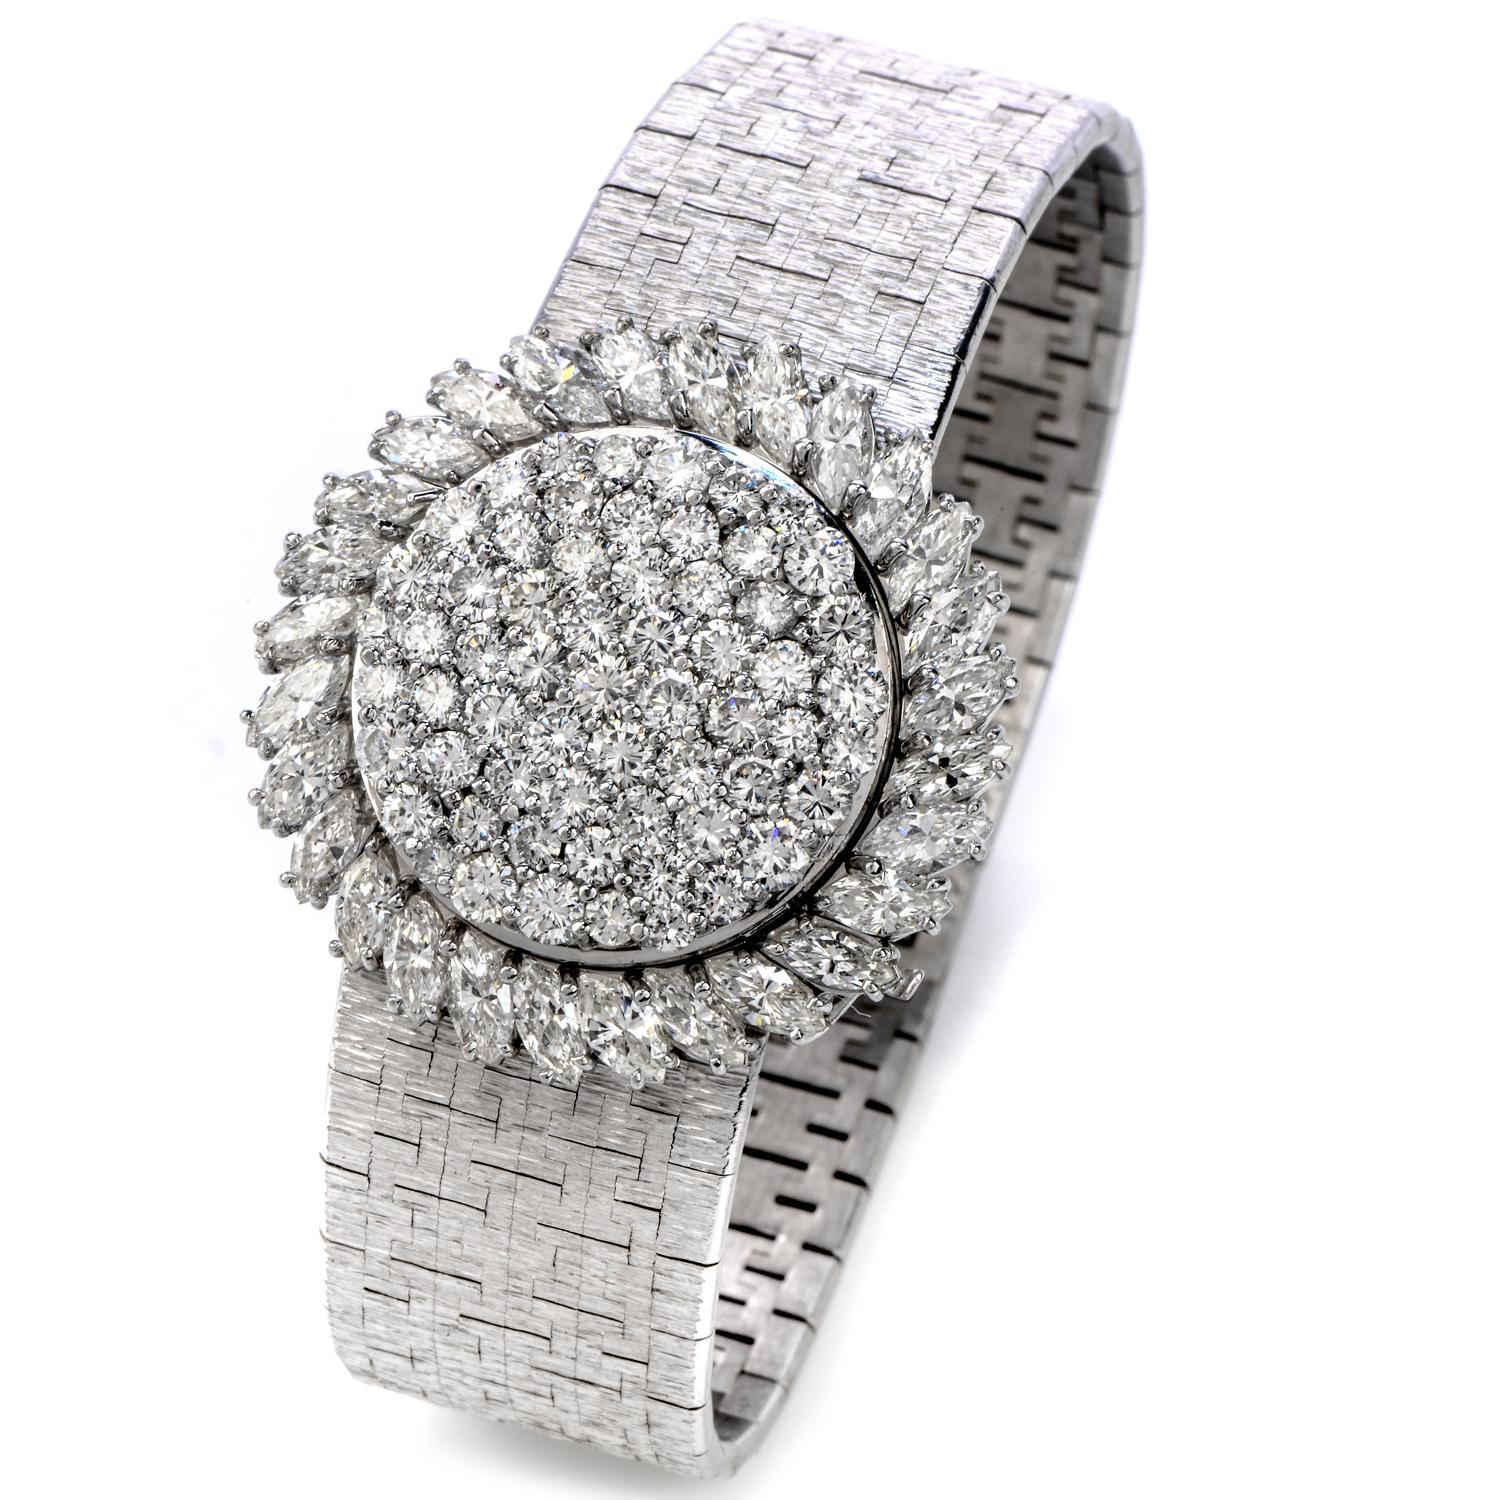 This stunning Vintage Diamond Piaget Ladies watch is crafted in 18K white gold. It features a beautiful diamond cover with marquise and round cut diamonds. This watch has winding movement, and fits a 6 1/2